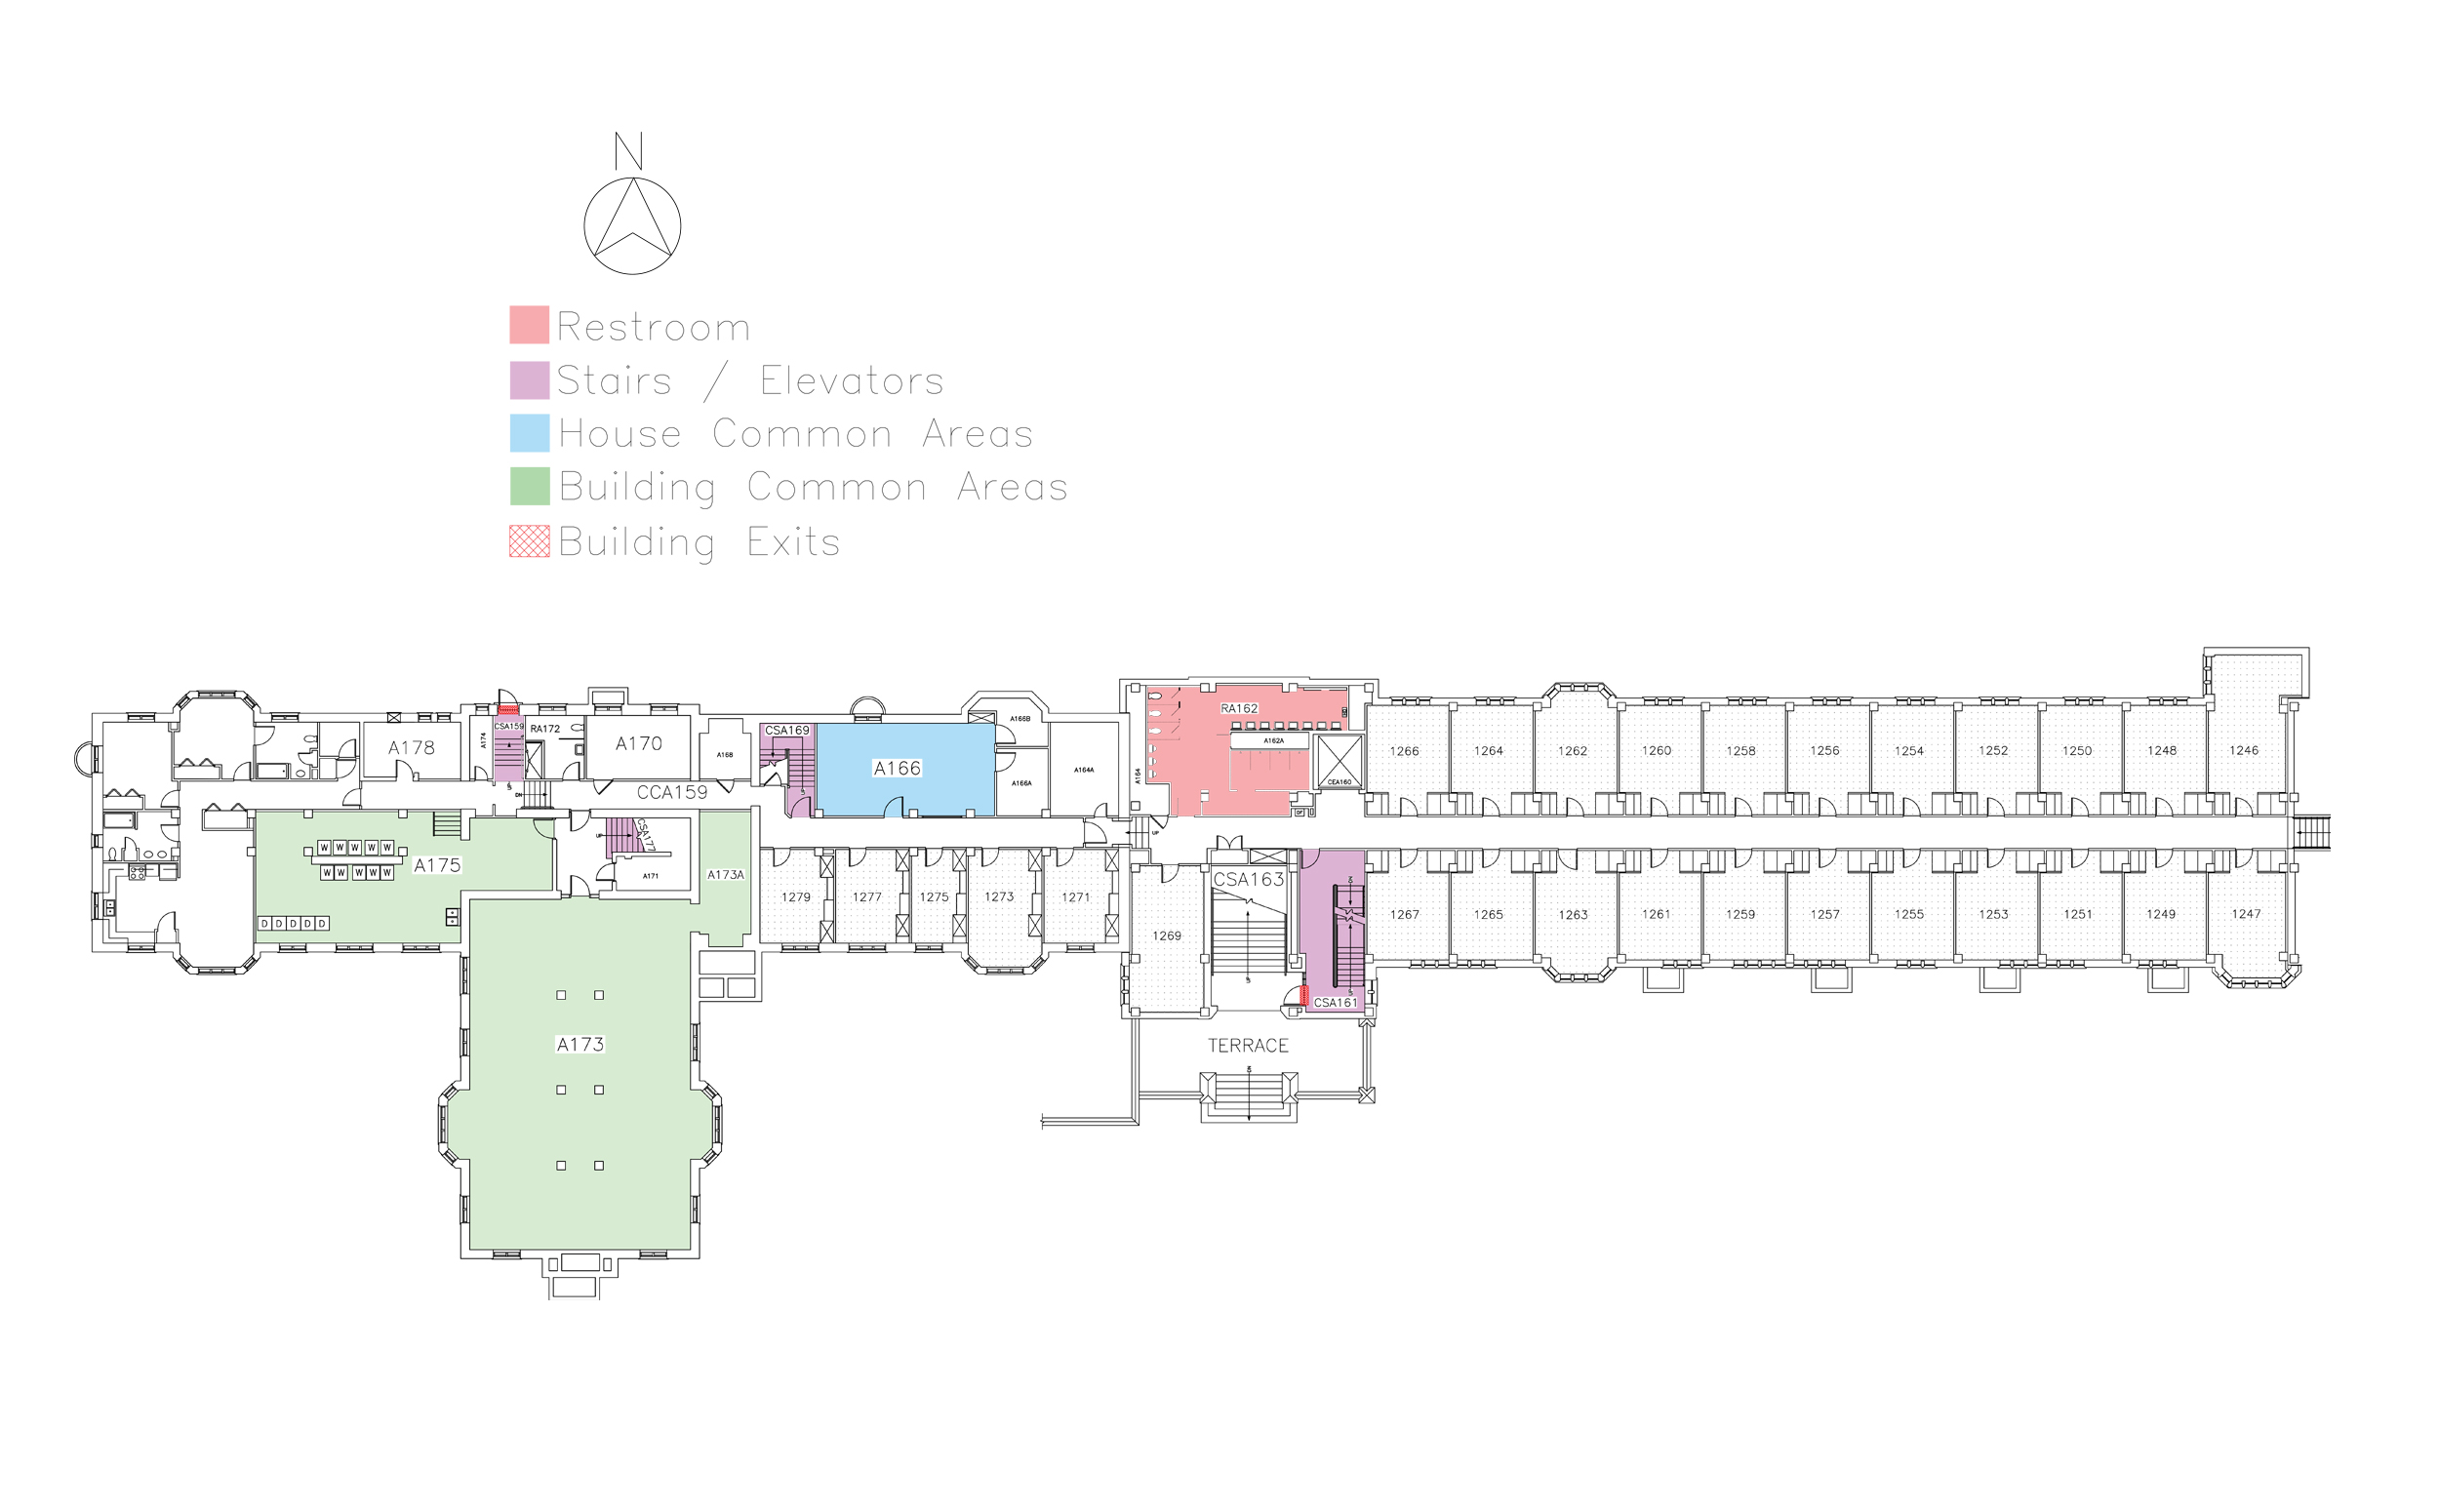 Dodds House, first floor in Friley Hall floor plan. Identifies the location of rooms, bathrooms and common space.